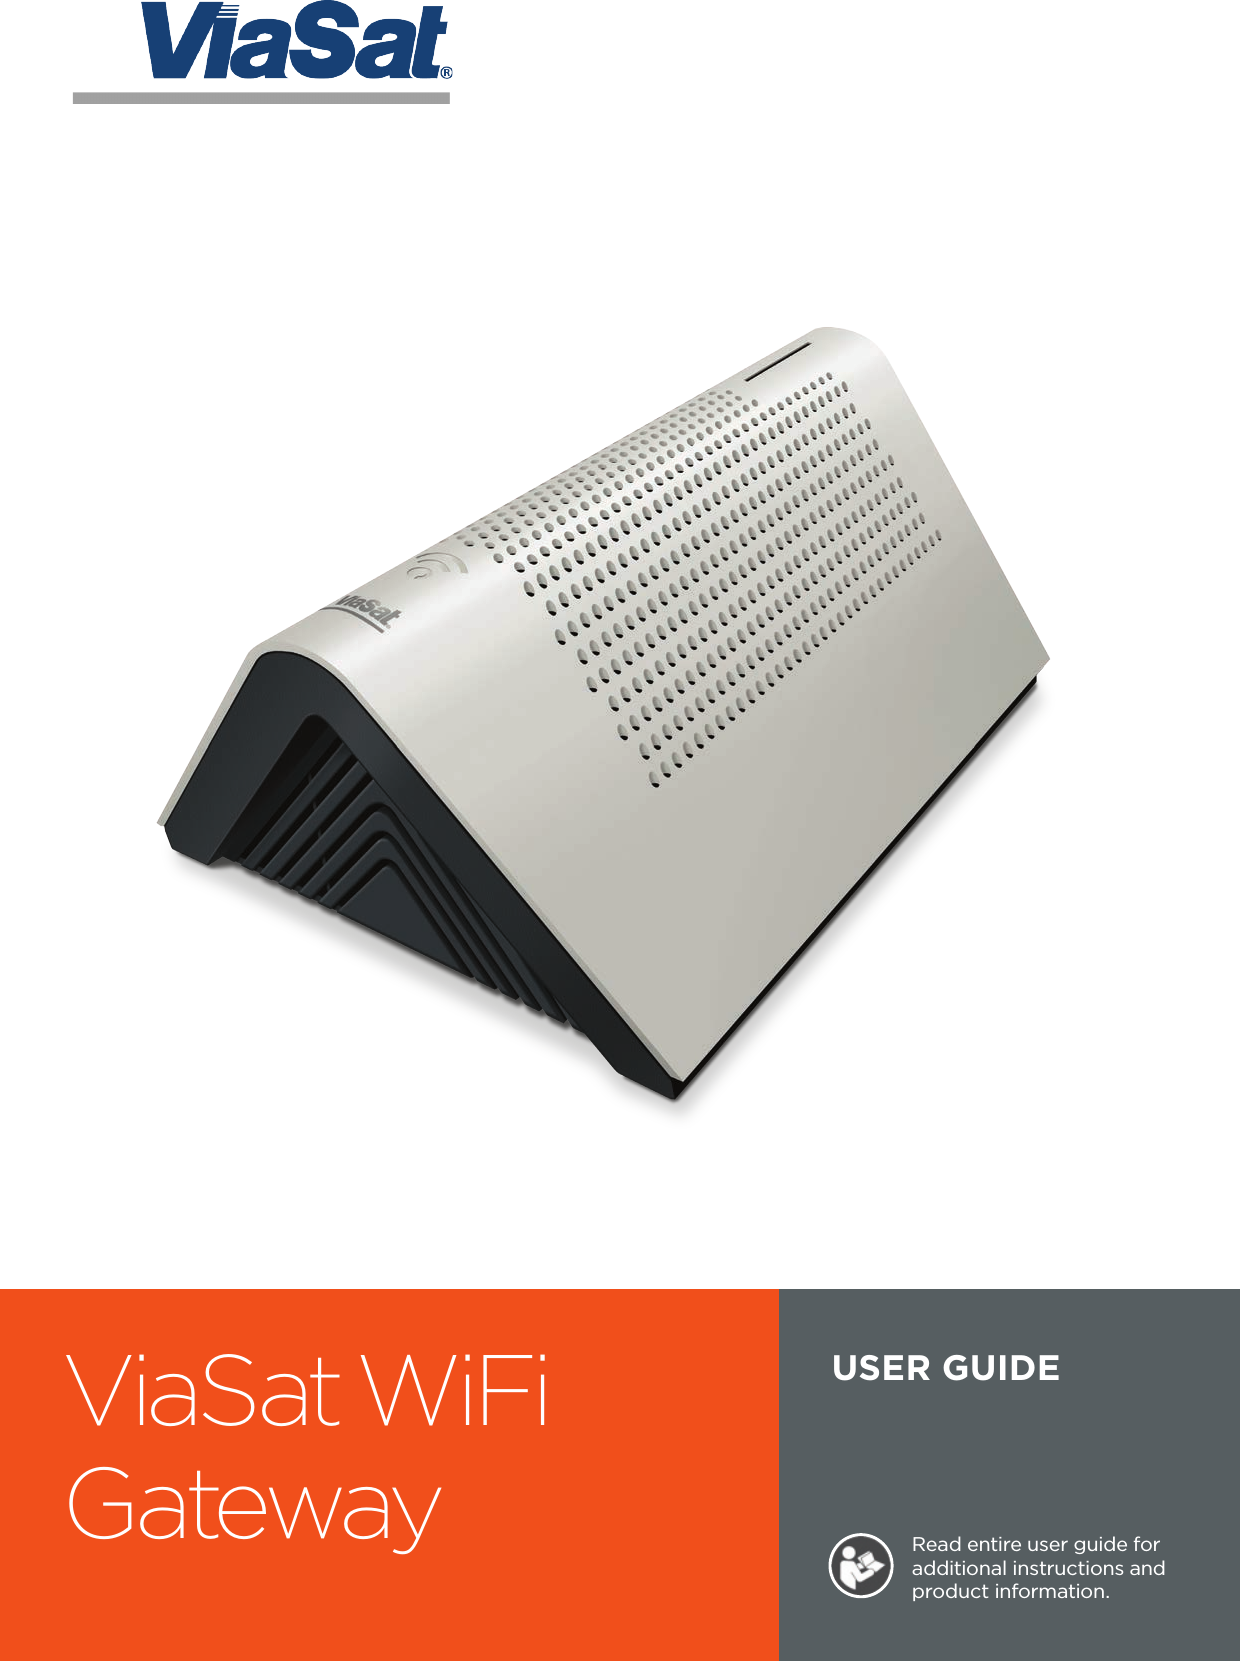 ViaSat WiFi GatewayUSER GUIDERead entire user guide for additional instructions and product information.